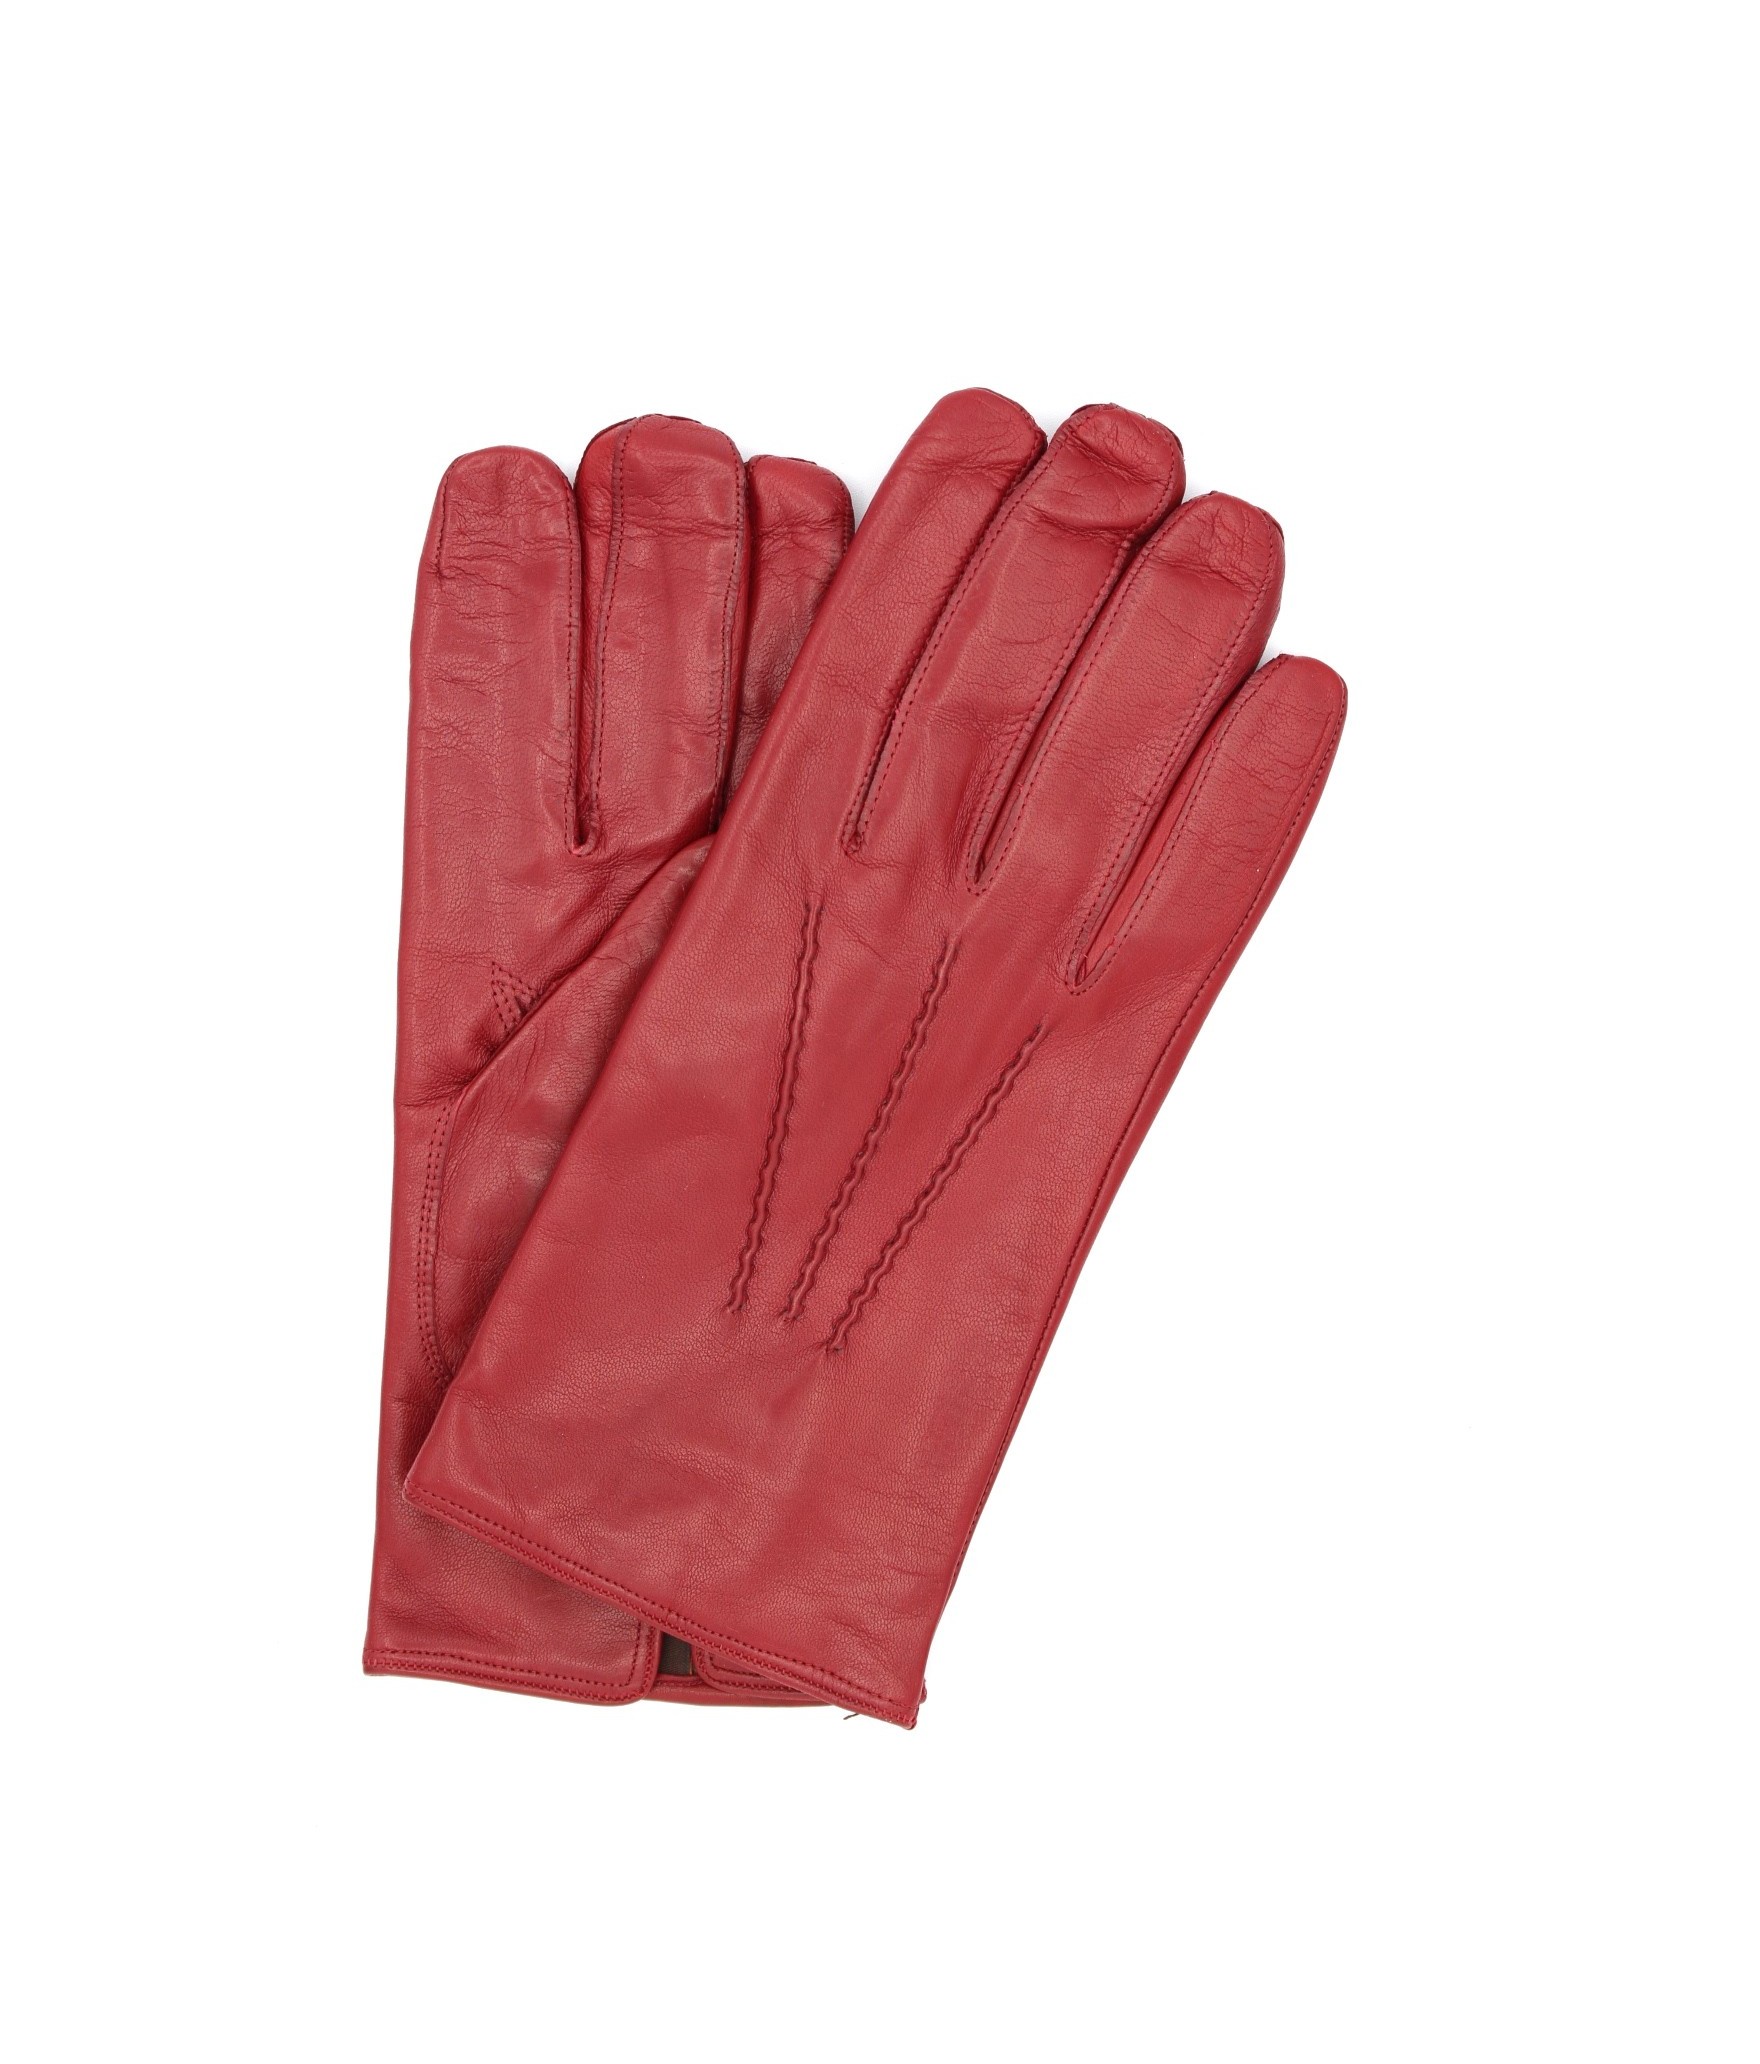 1294 Classic Kid Leather Man Gloves Cashmere Lined Dark Pink 